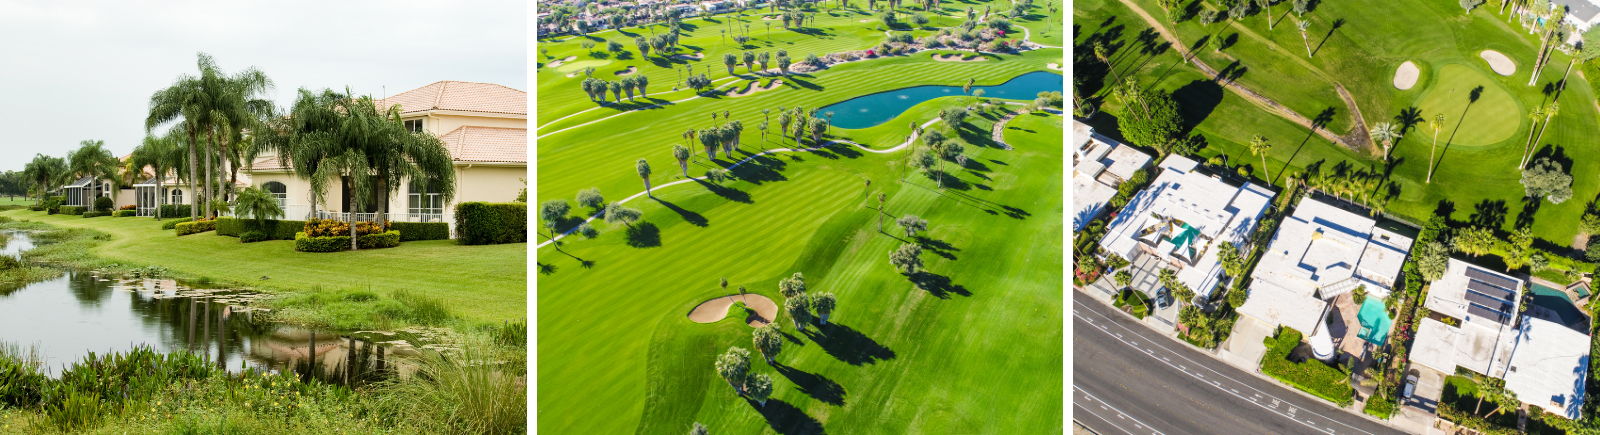 South Florida Golf Course Homes for Sale